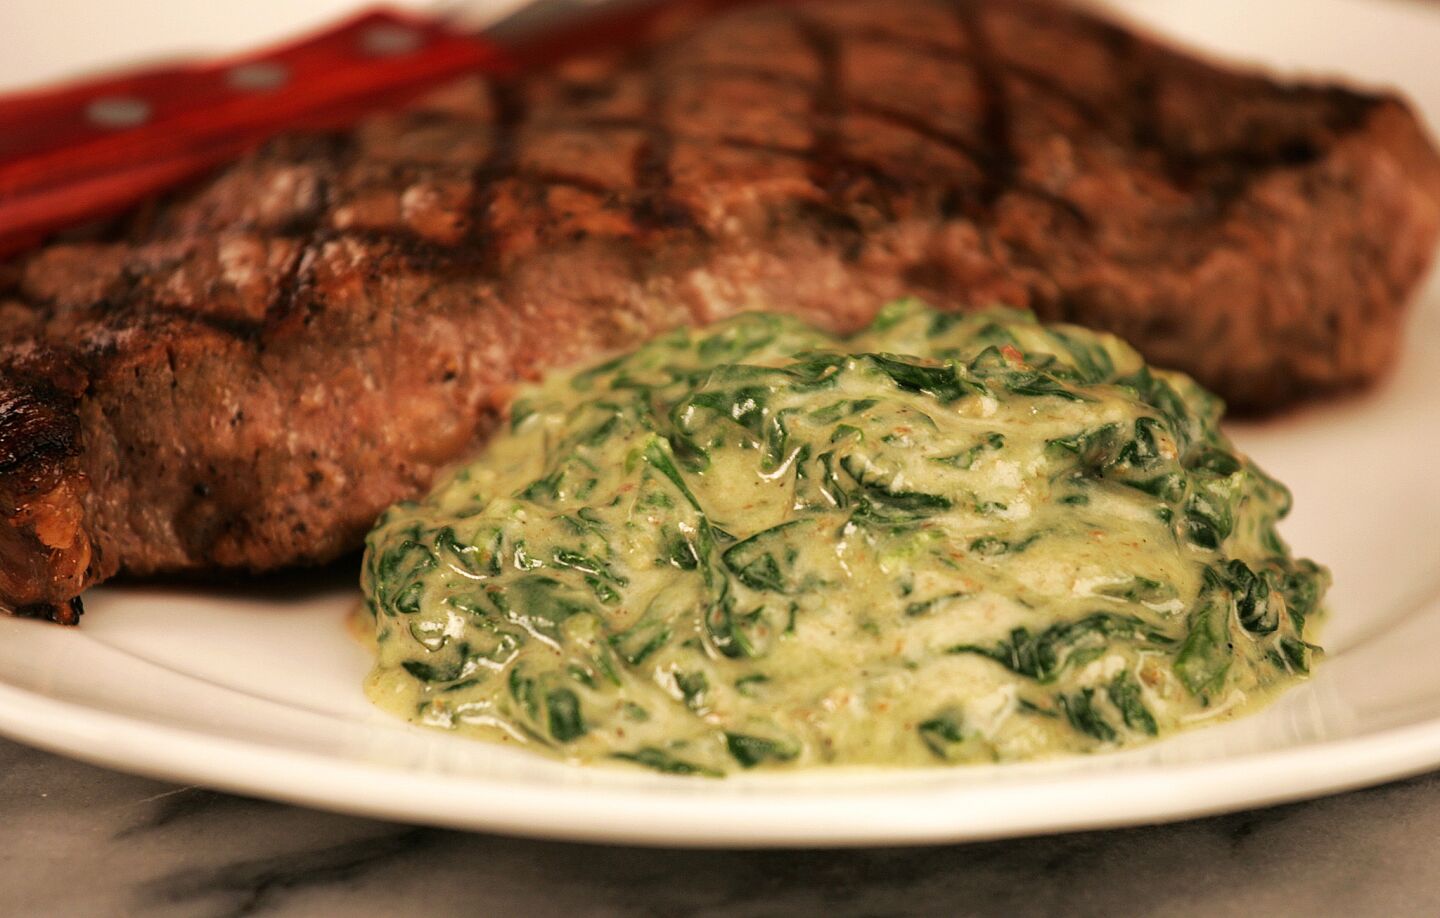 A reader asked the test kitchen for a creamed spinach recipe the way it's served at Morton's, Lawry's and other steak houses. "Don't go low-cal on me," he implored. The result: Recipe: Creamed spinach